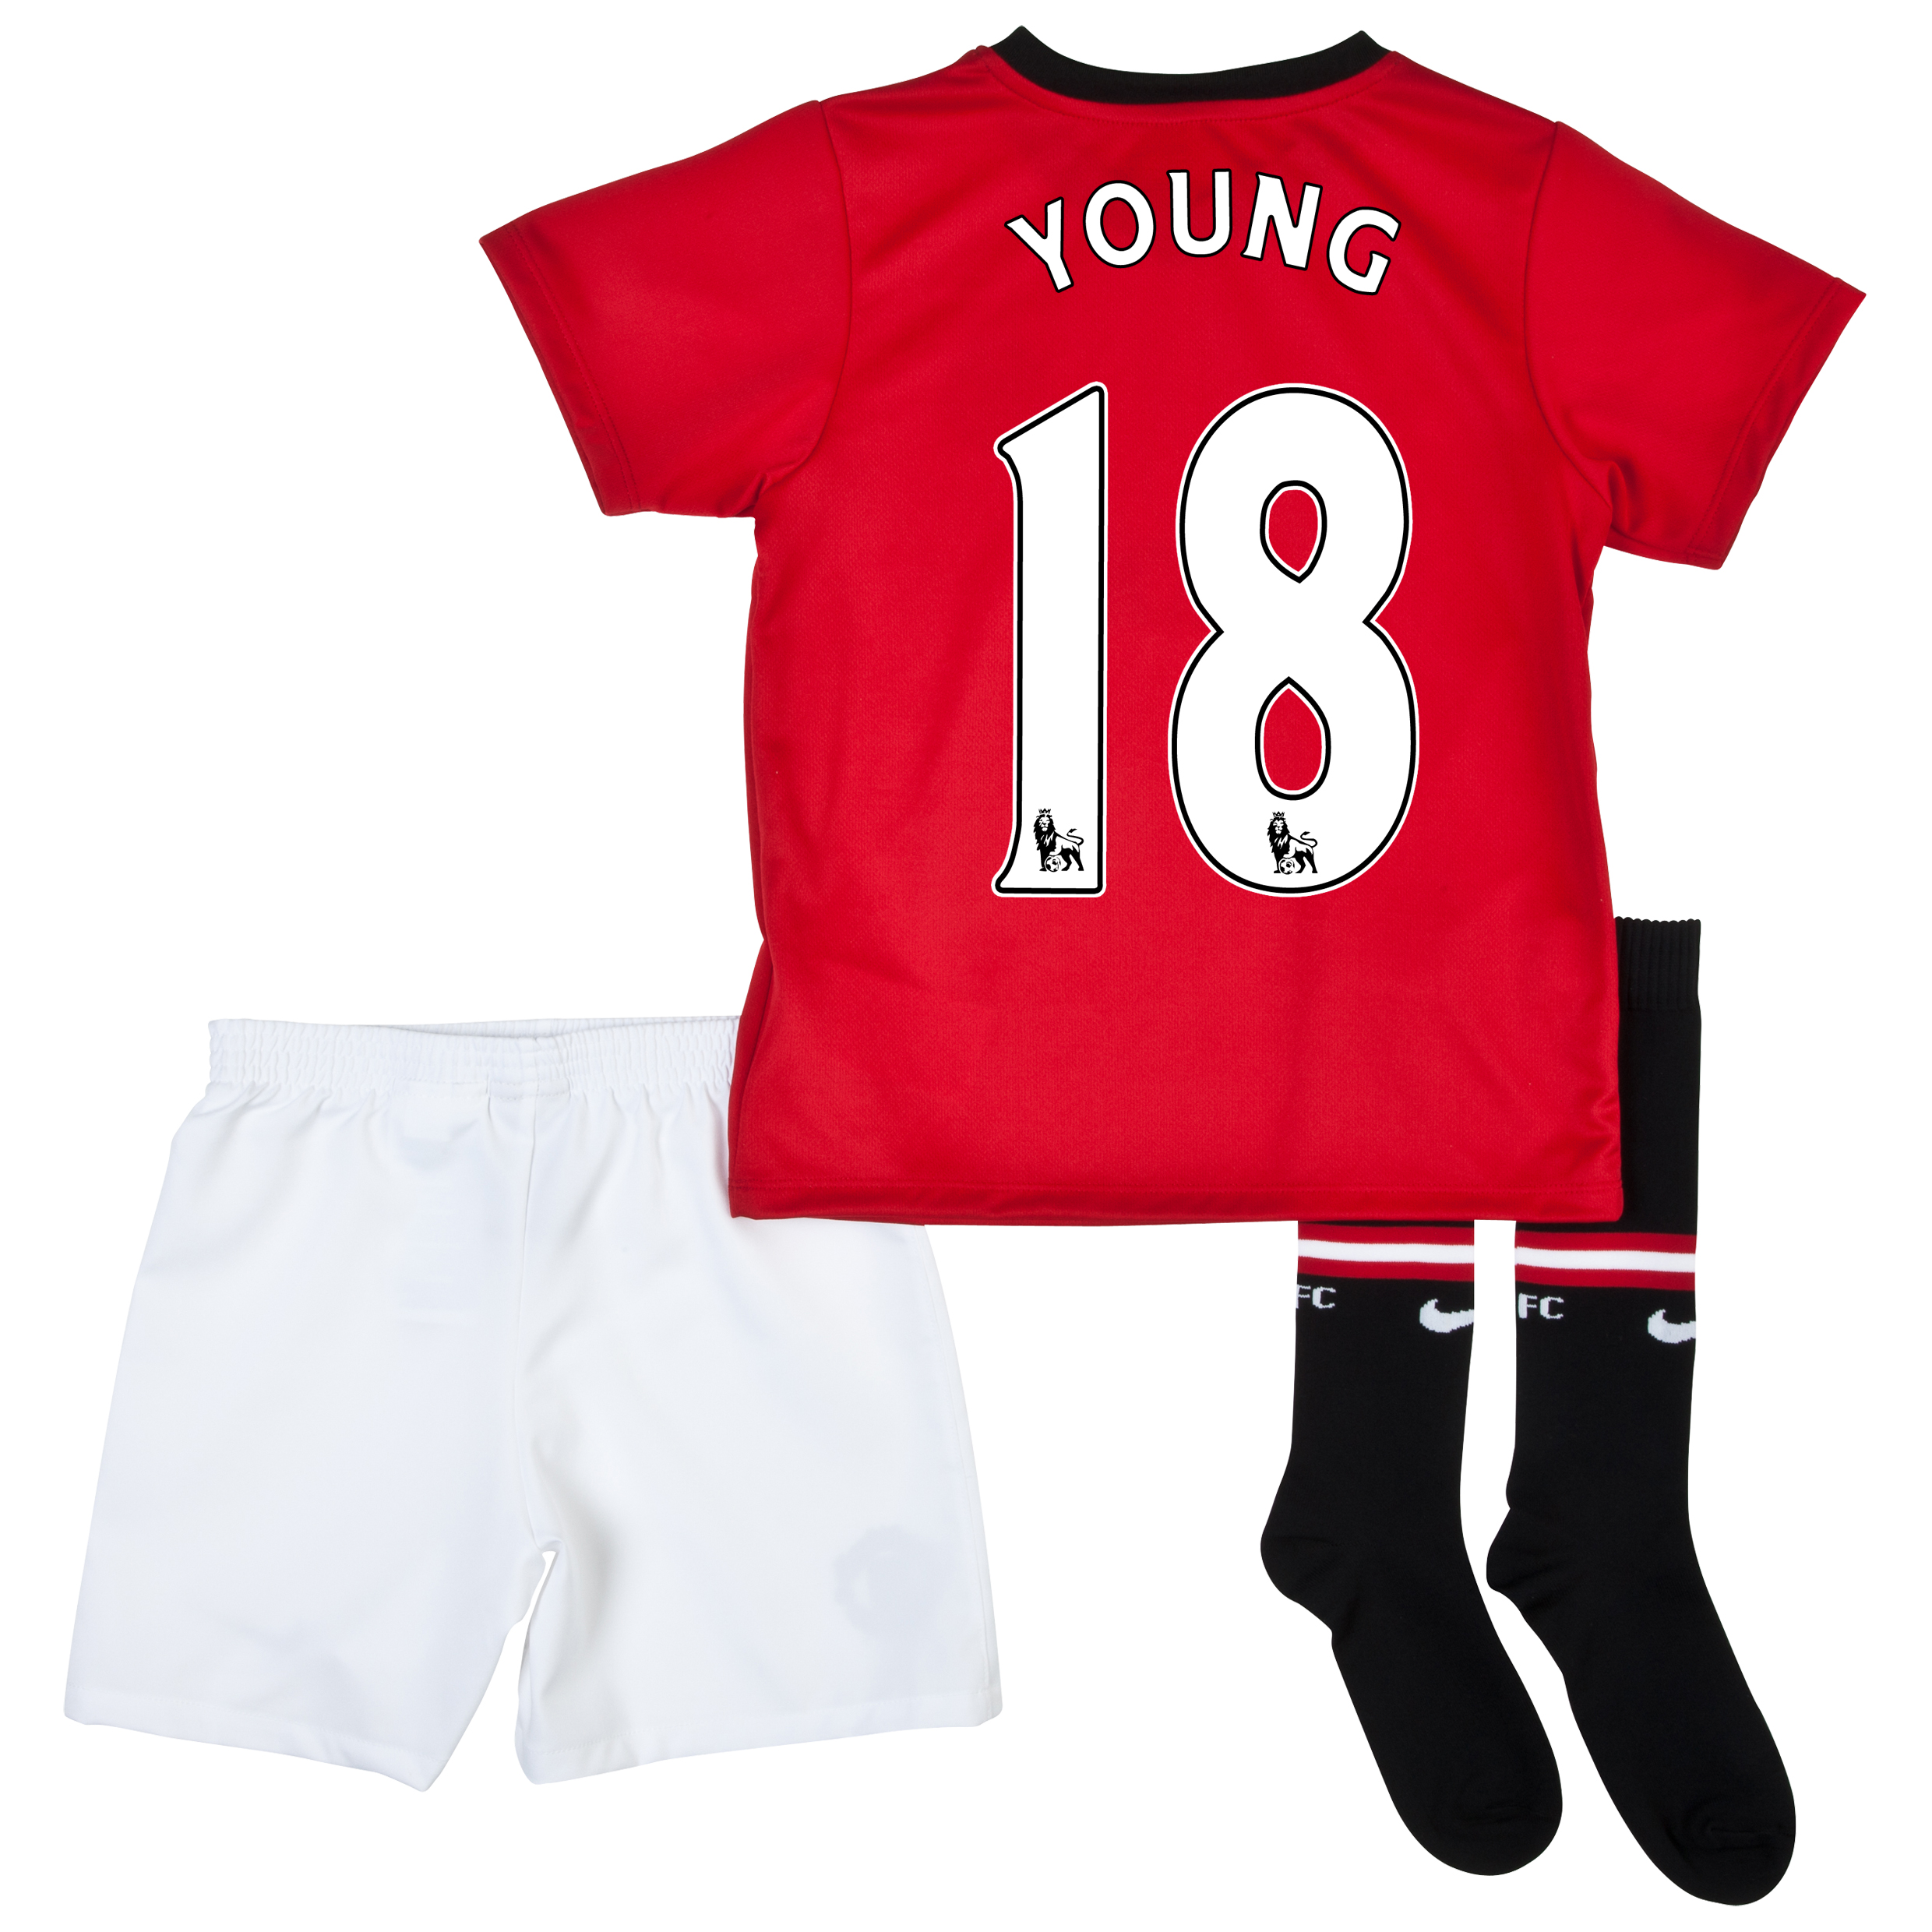 Manchester United Home Kit 2013/14 - Little Boys with Young 18 printing